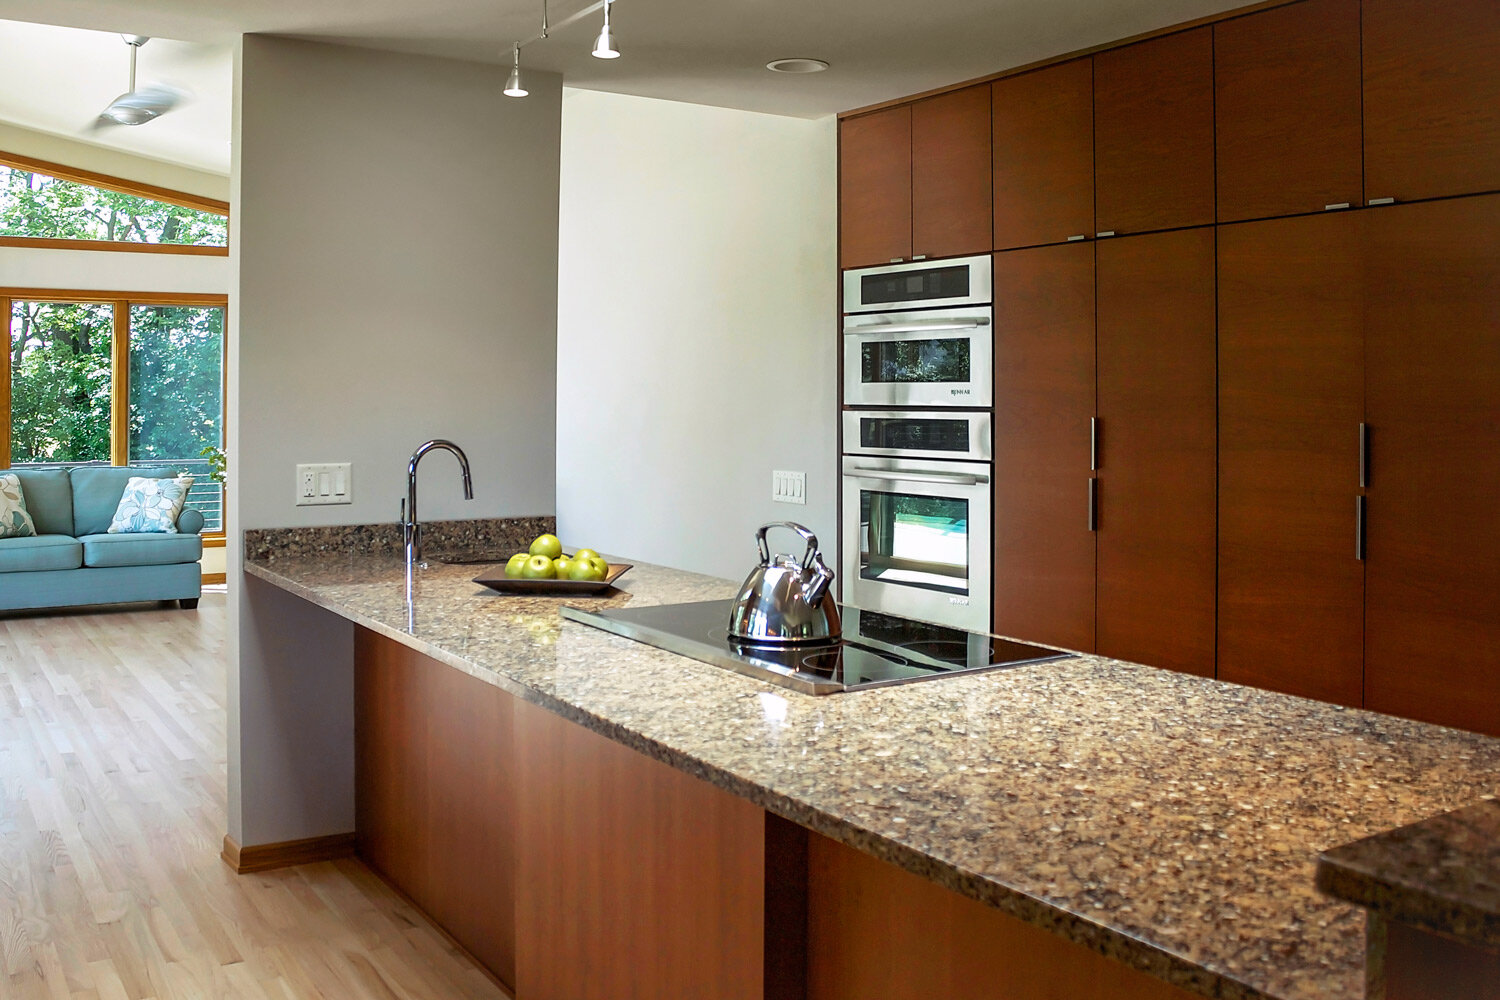 Is A Semi-Open Kitchen Design and Renovation Right For Your Lifestyle